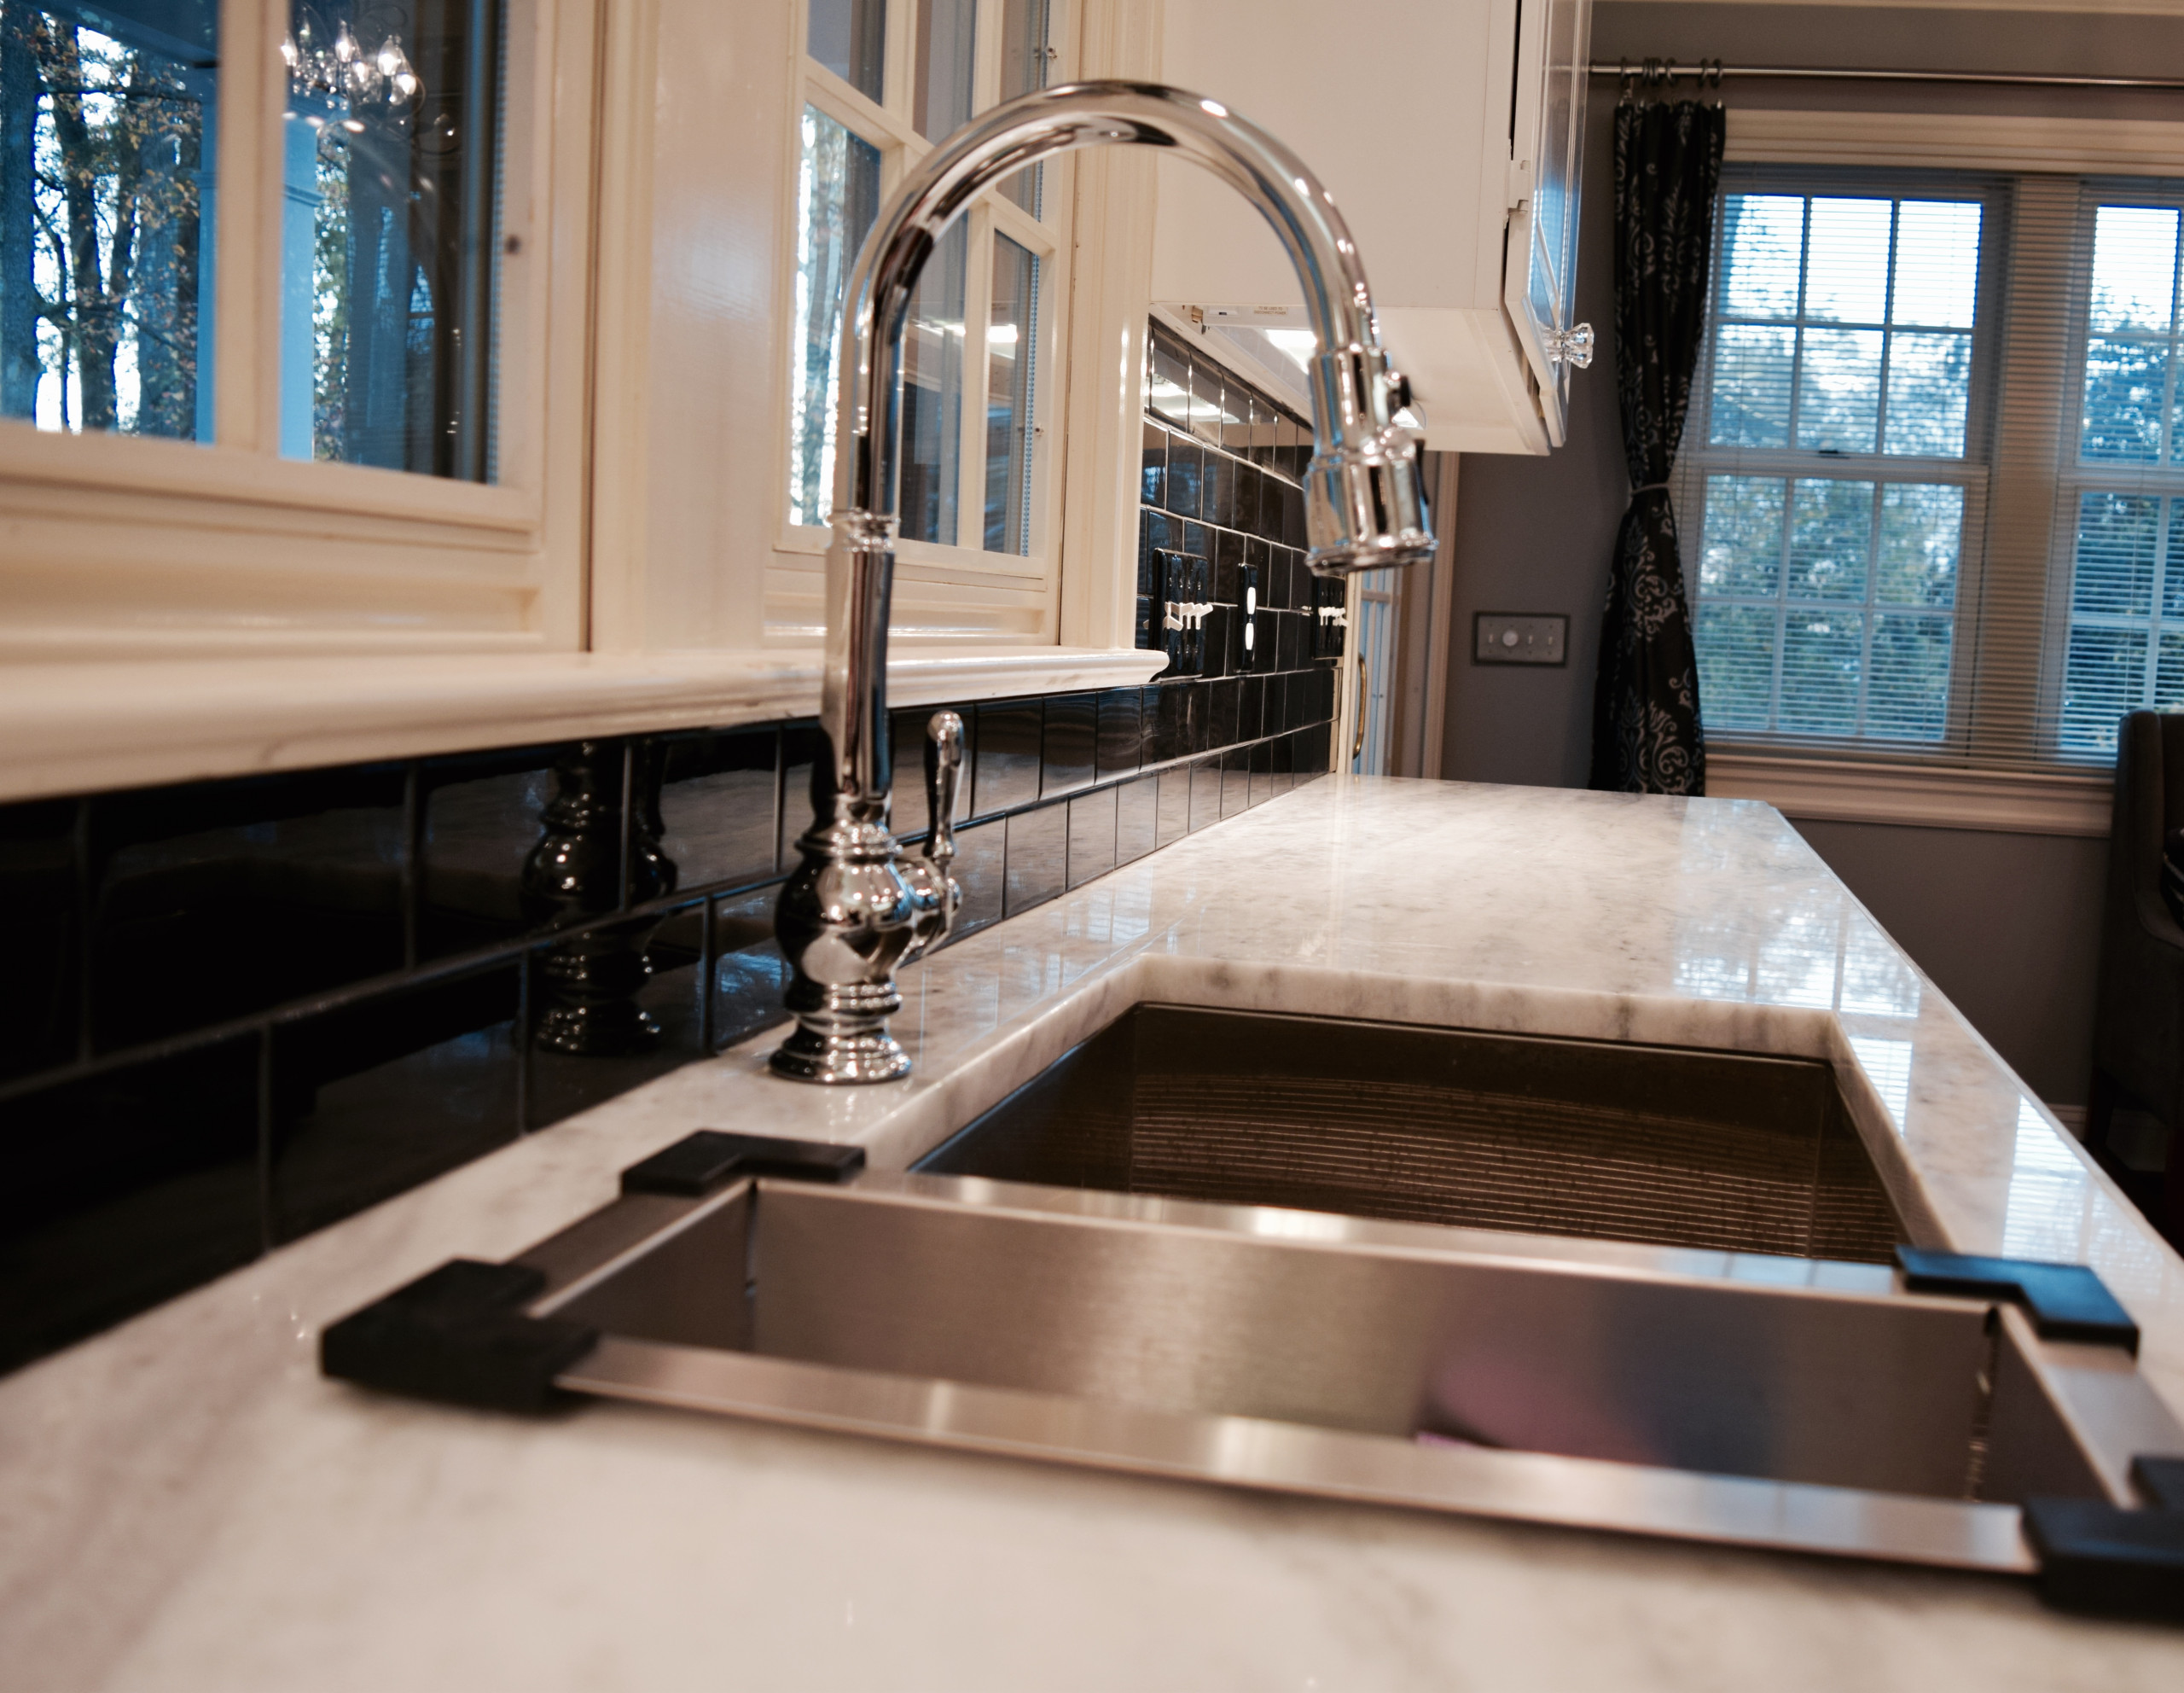 Goose neck chrome faucet with tile back splash and granite tops.